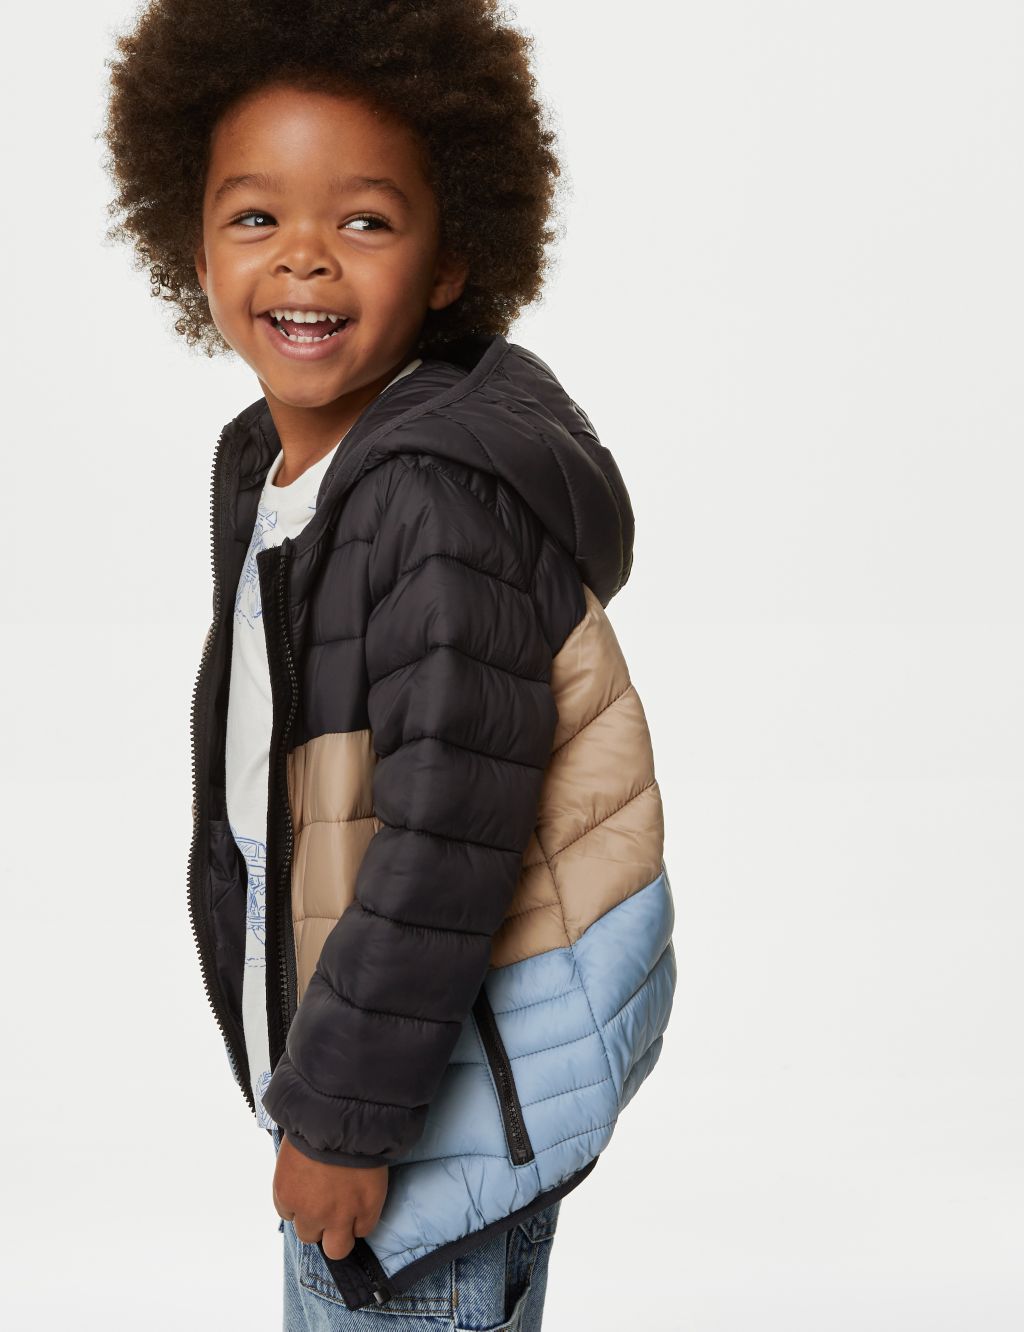 Stormwear™ Lightweight Padded Jacket (2-8 Yrs) | M&S Collection | M&S